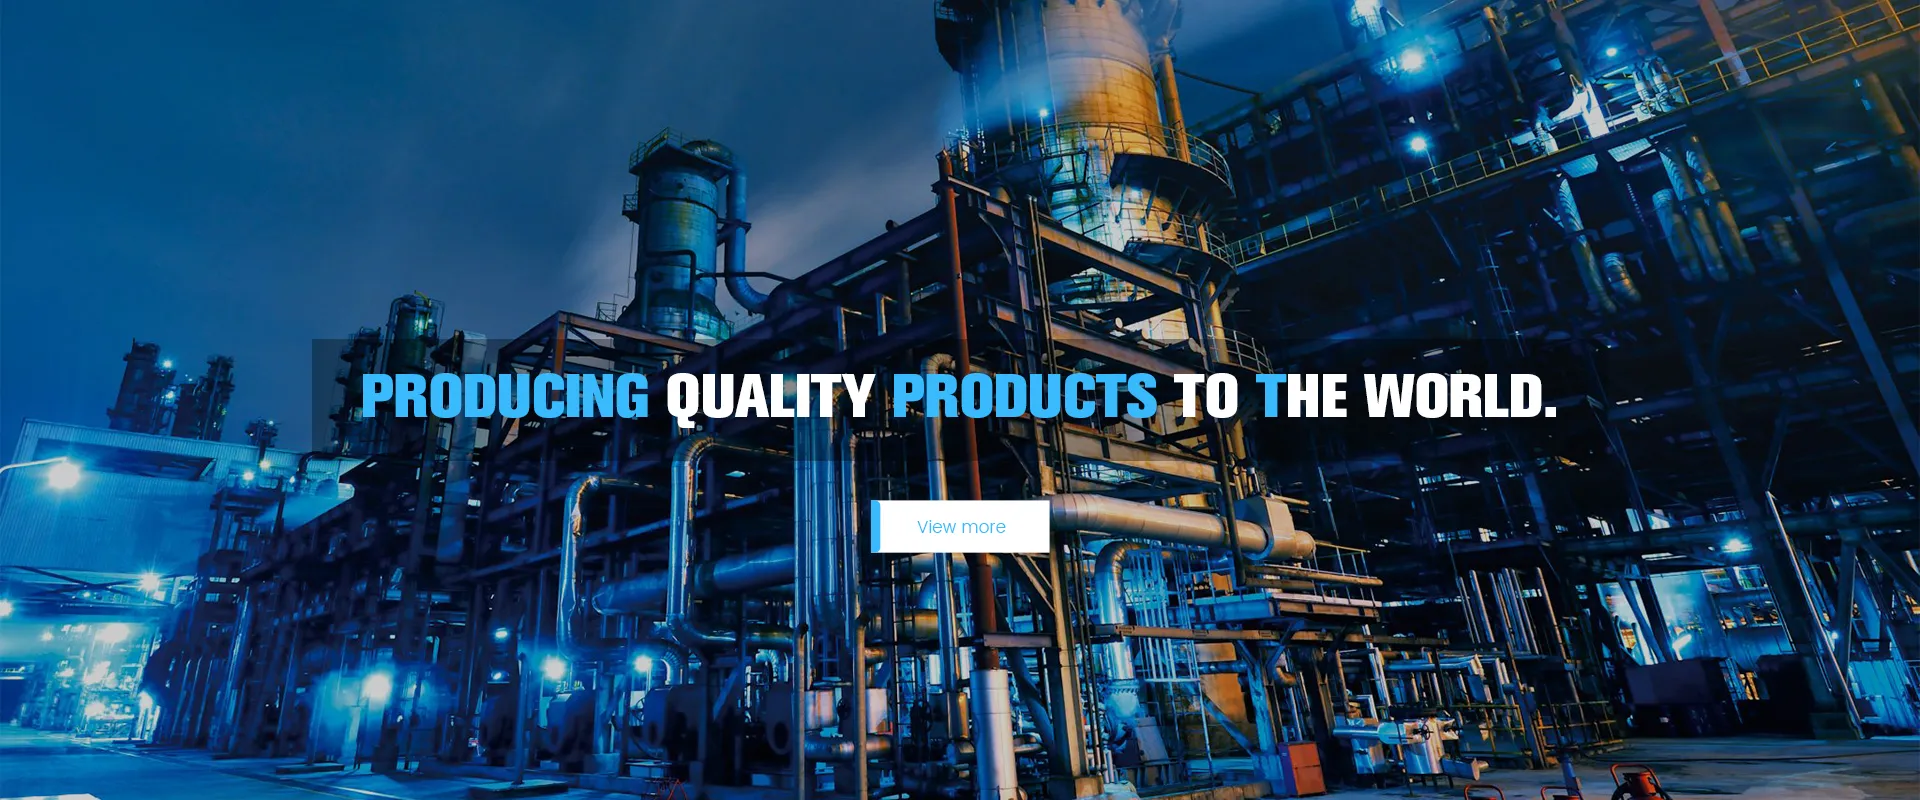 PRODUCING QUALITYPRODUCTSTO THE WORLD.